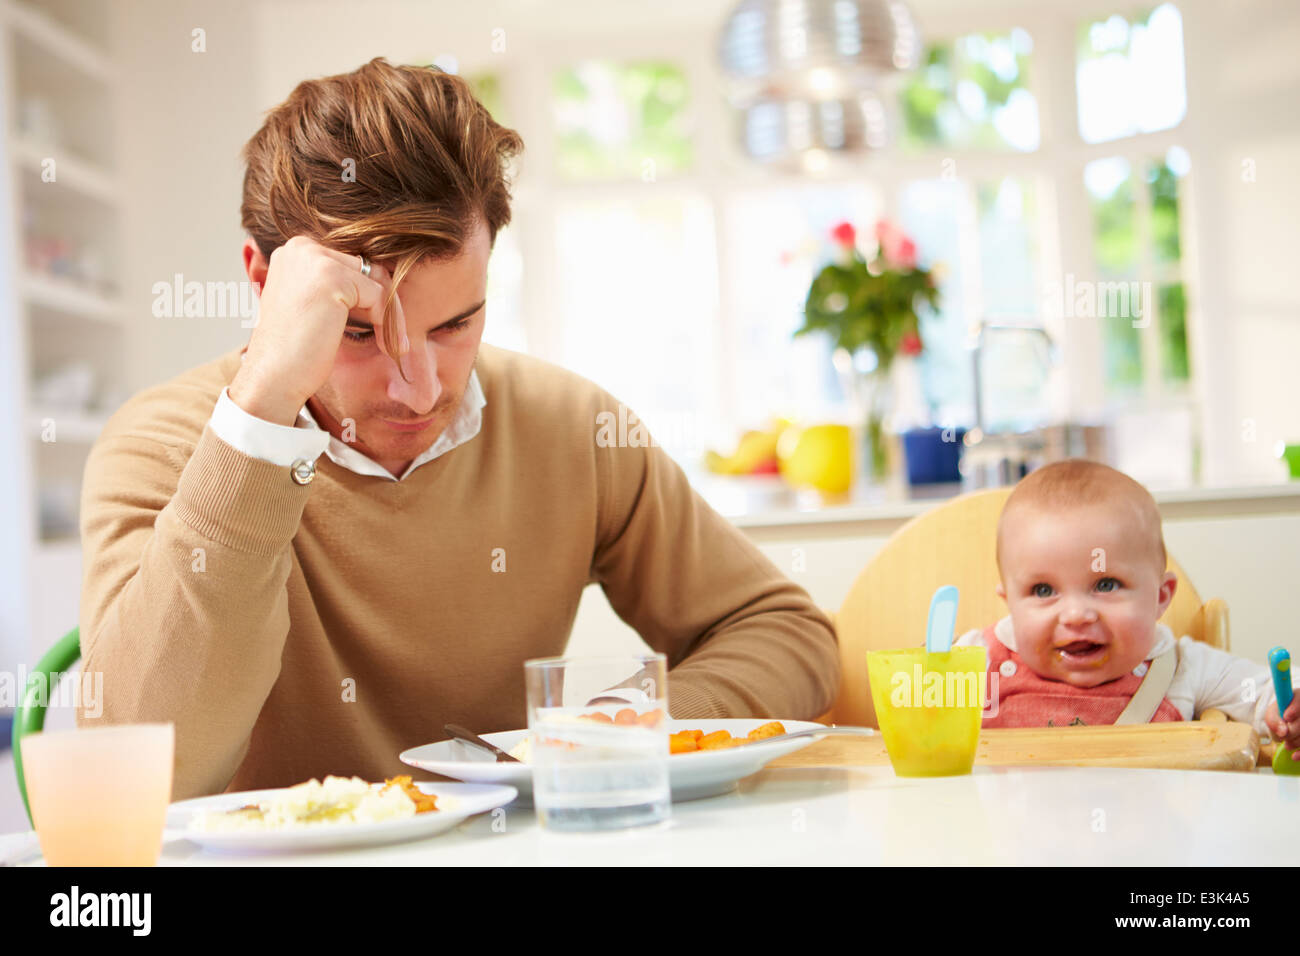 Father Feeling Depressed At Baby's Mealtime Stock Photo